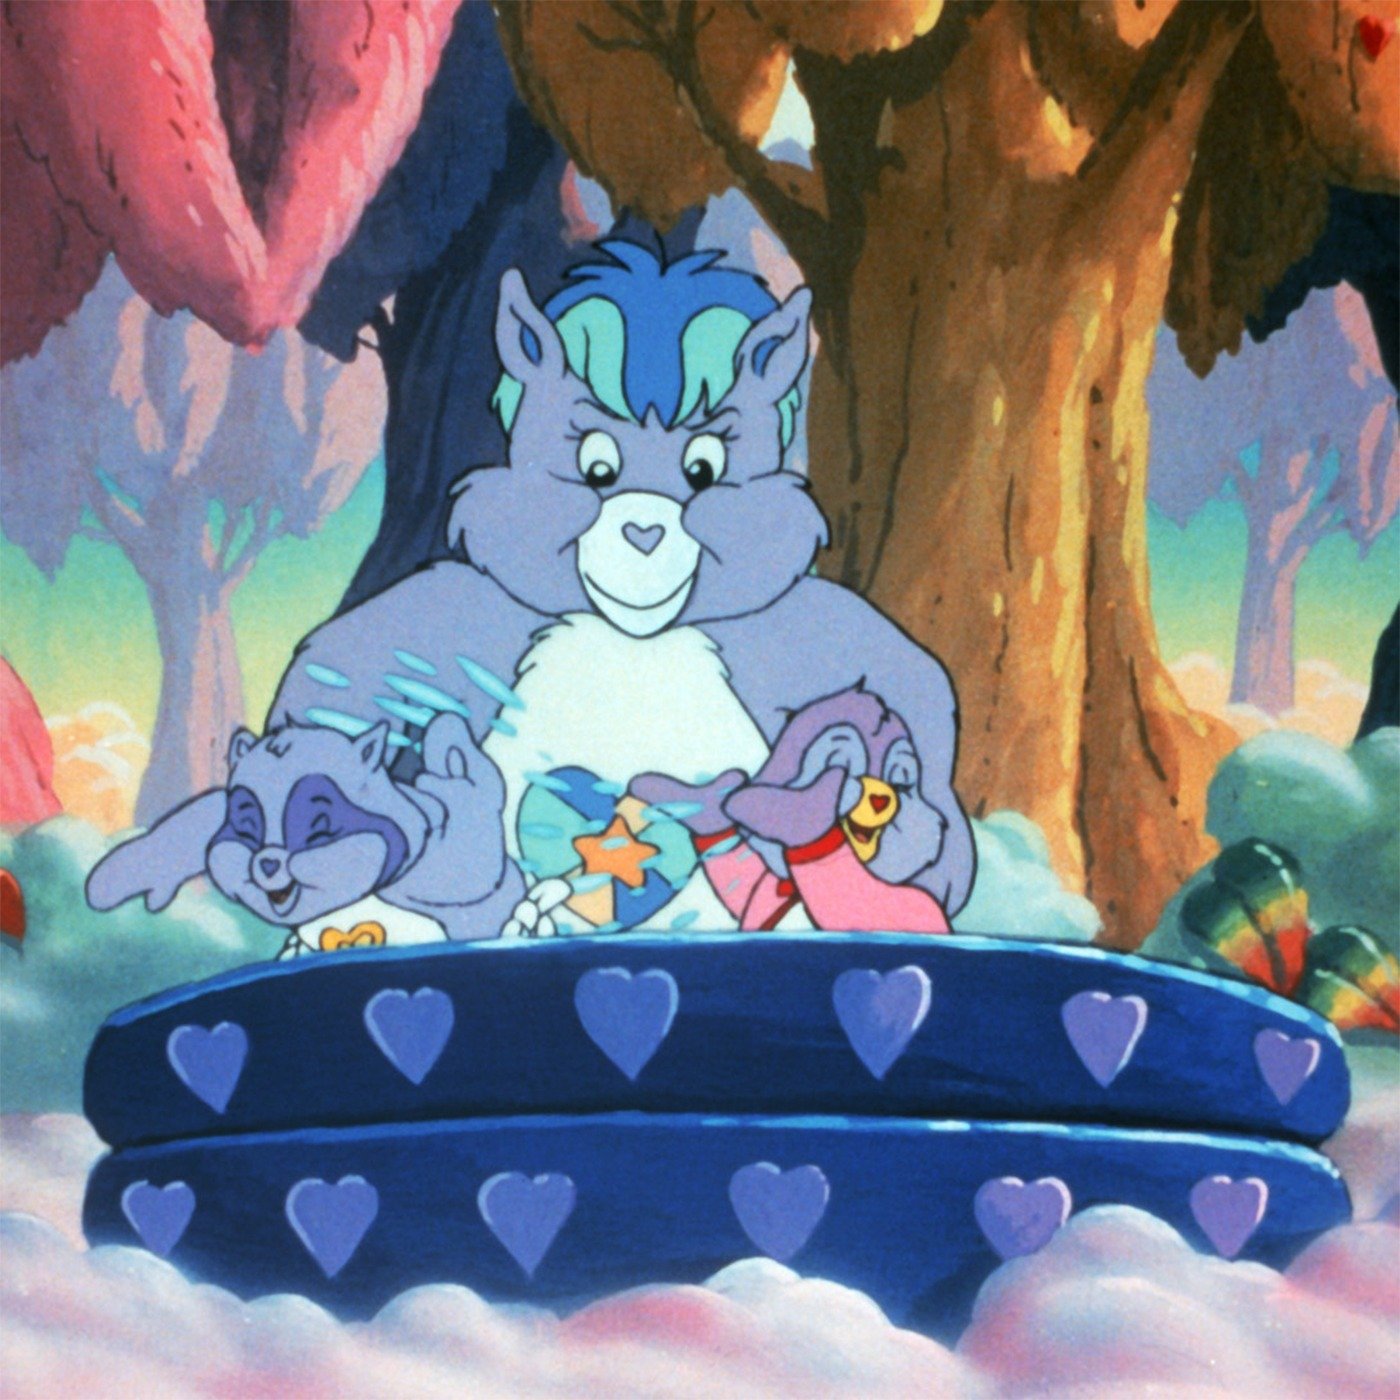 Kids Today Can Watch Their Favorite TV Shows Like 'Care Bears